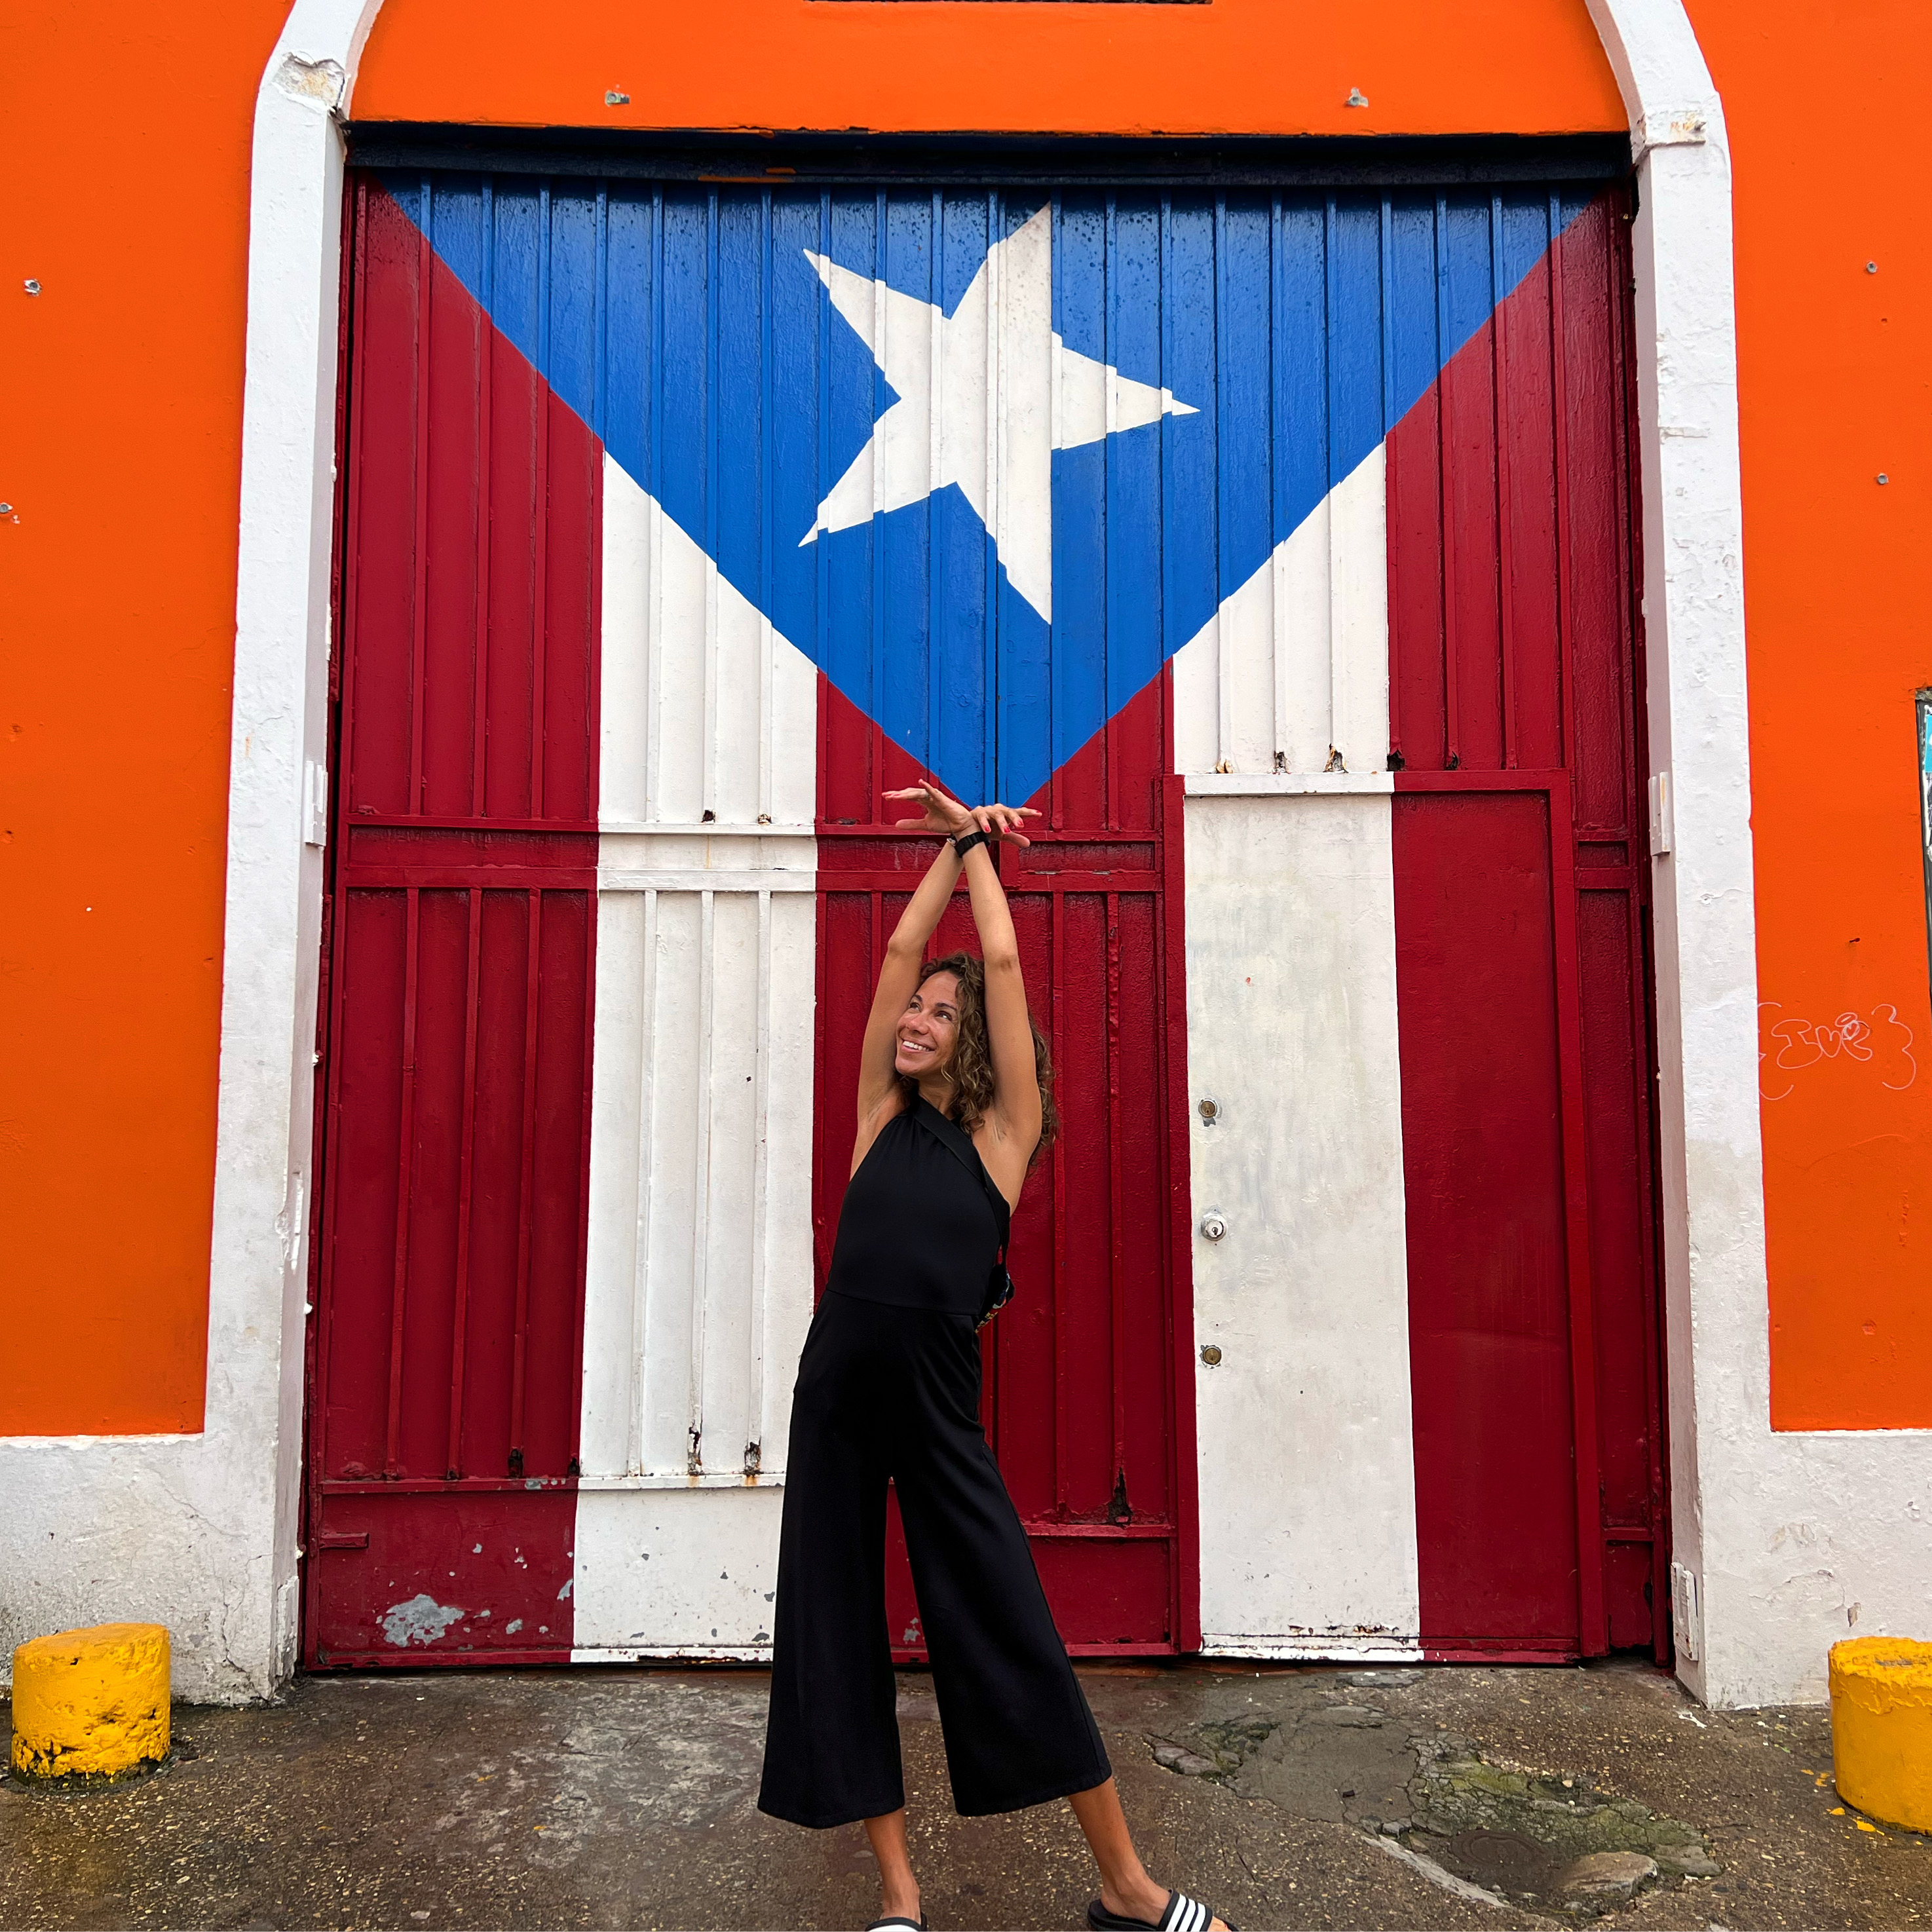 Here’s why more couples are choosing Puerto Rico for their honeymoon